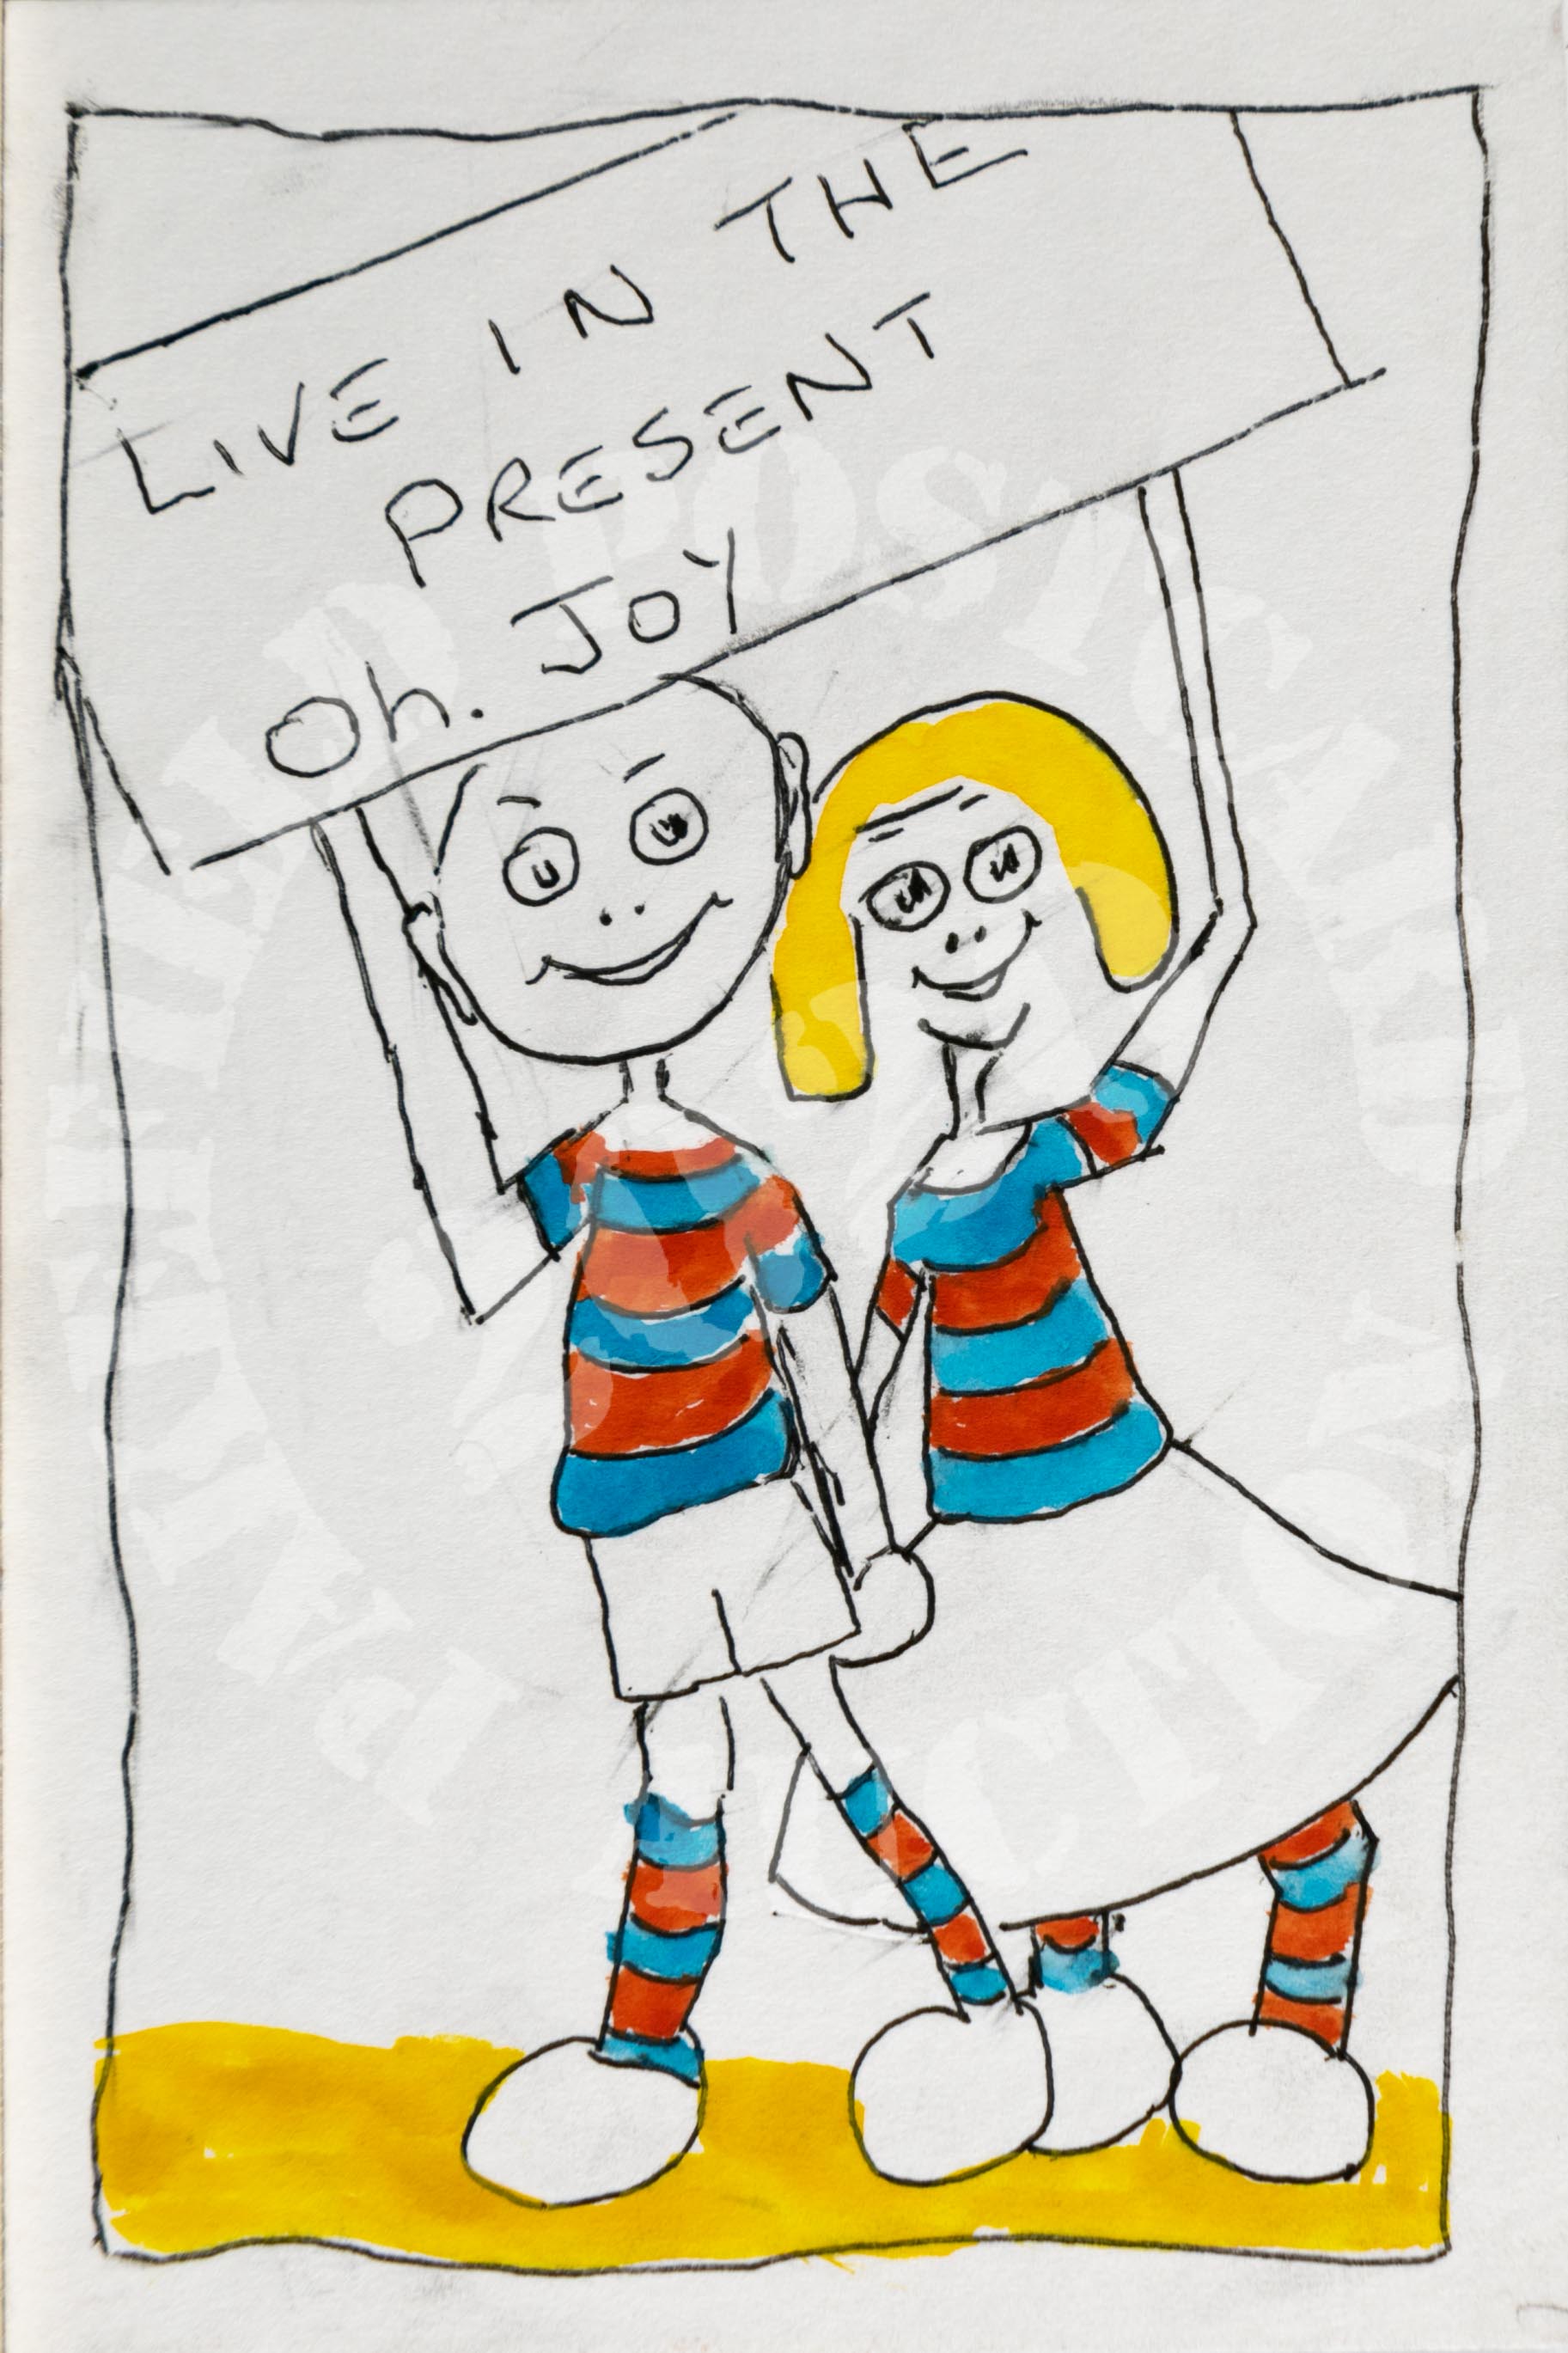 Live in the Present - Oh Joy! - watercolour & ink